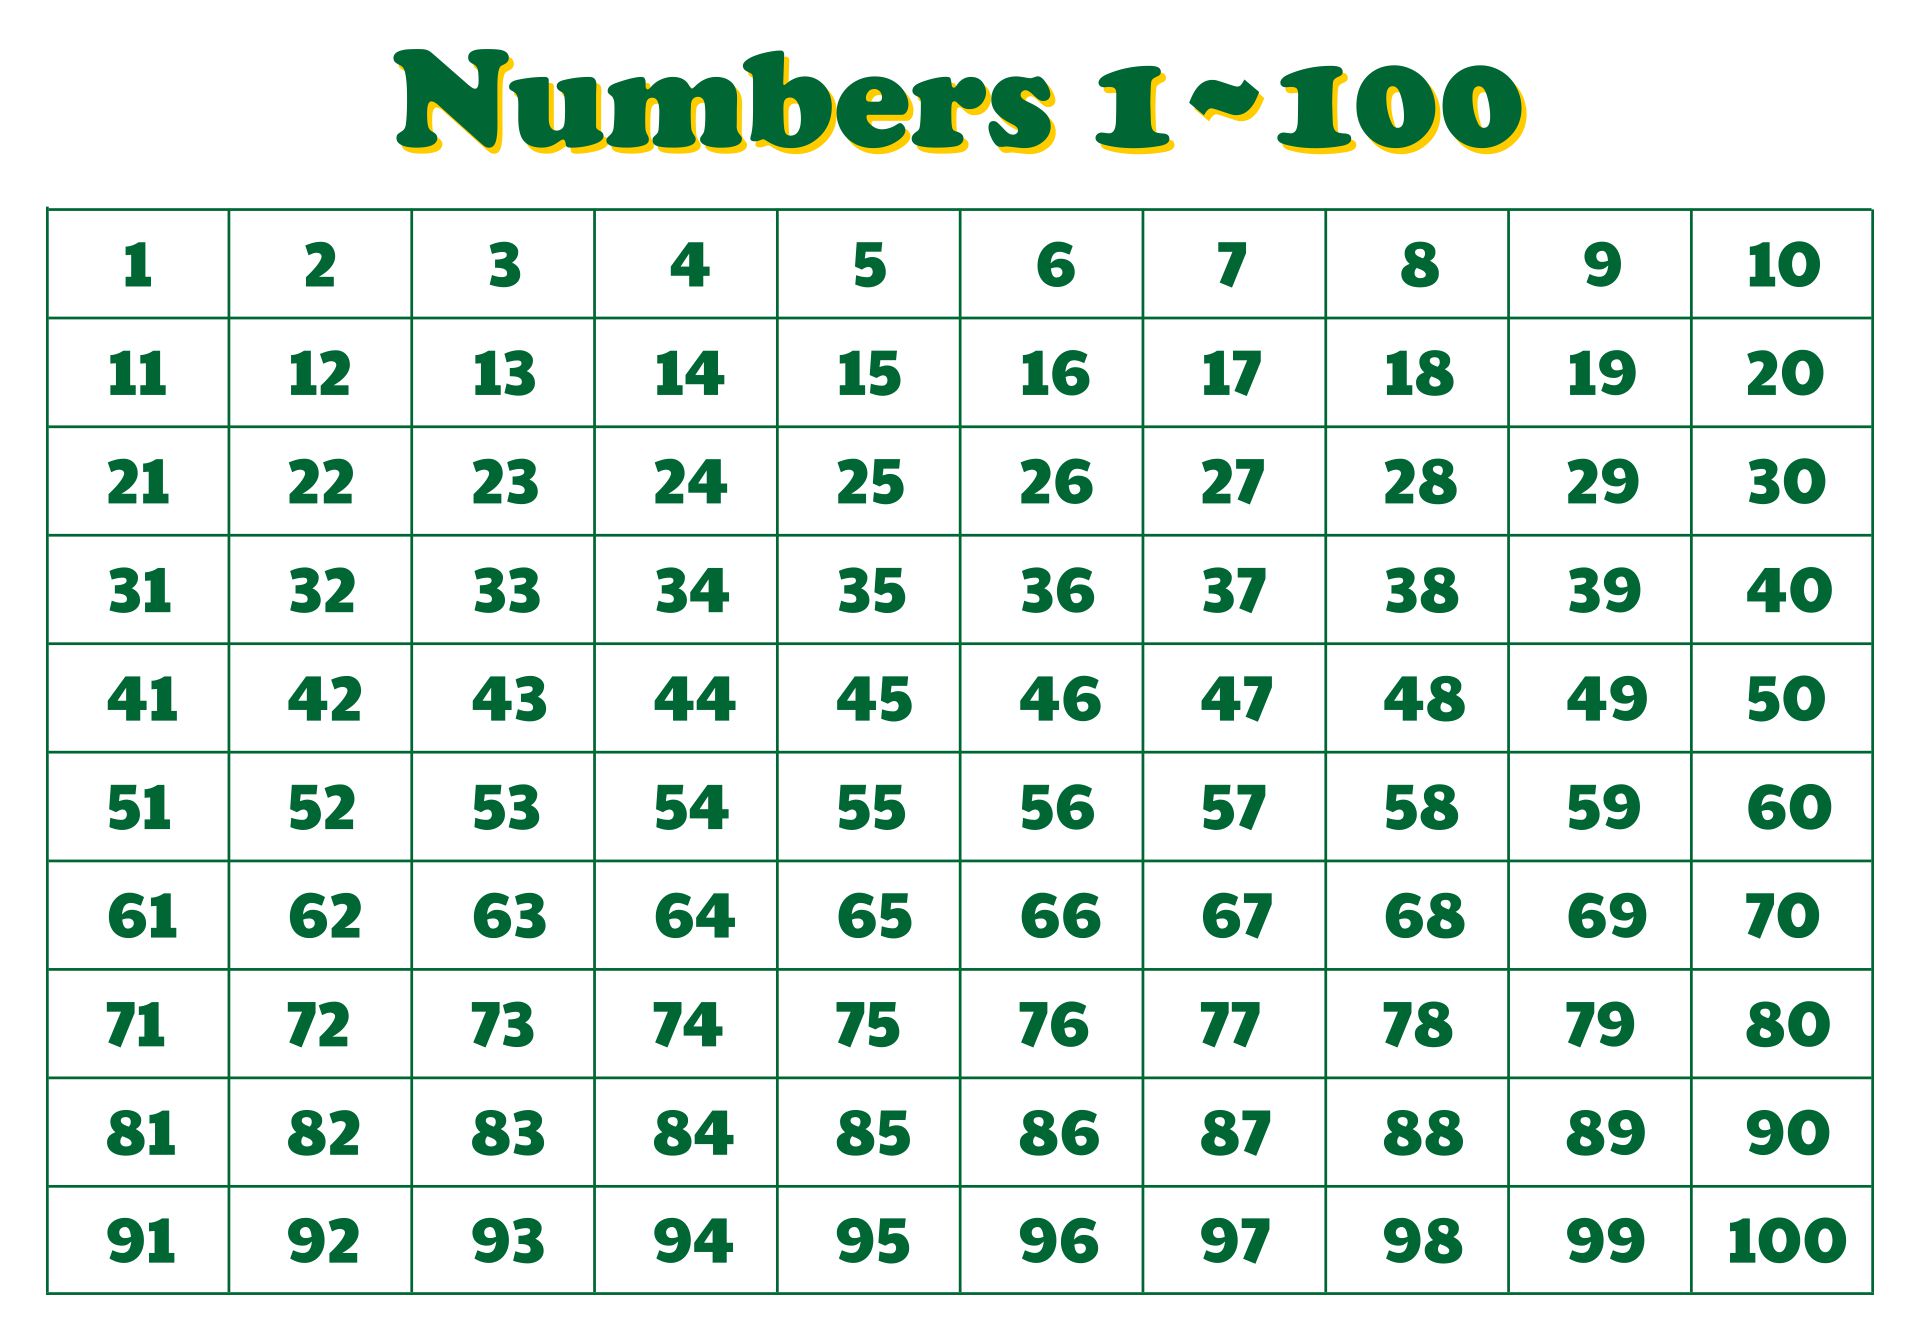 10 X 10 Grid with Numbers 1 100